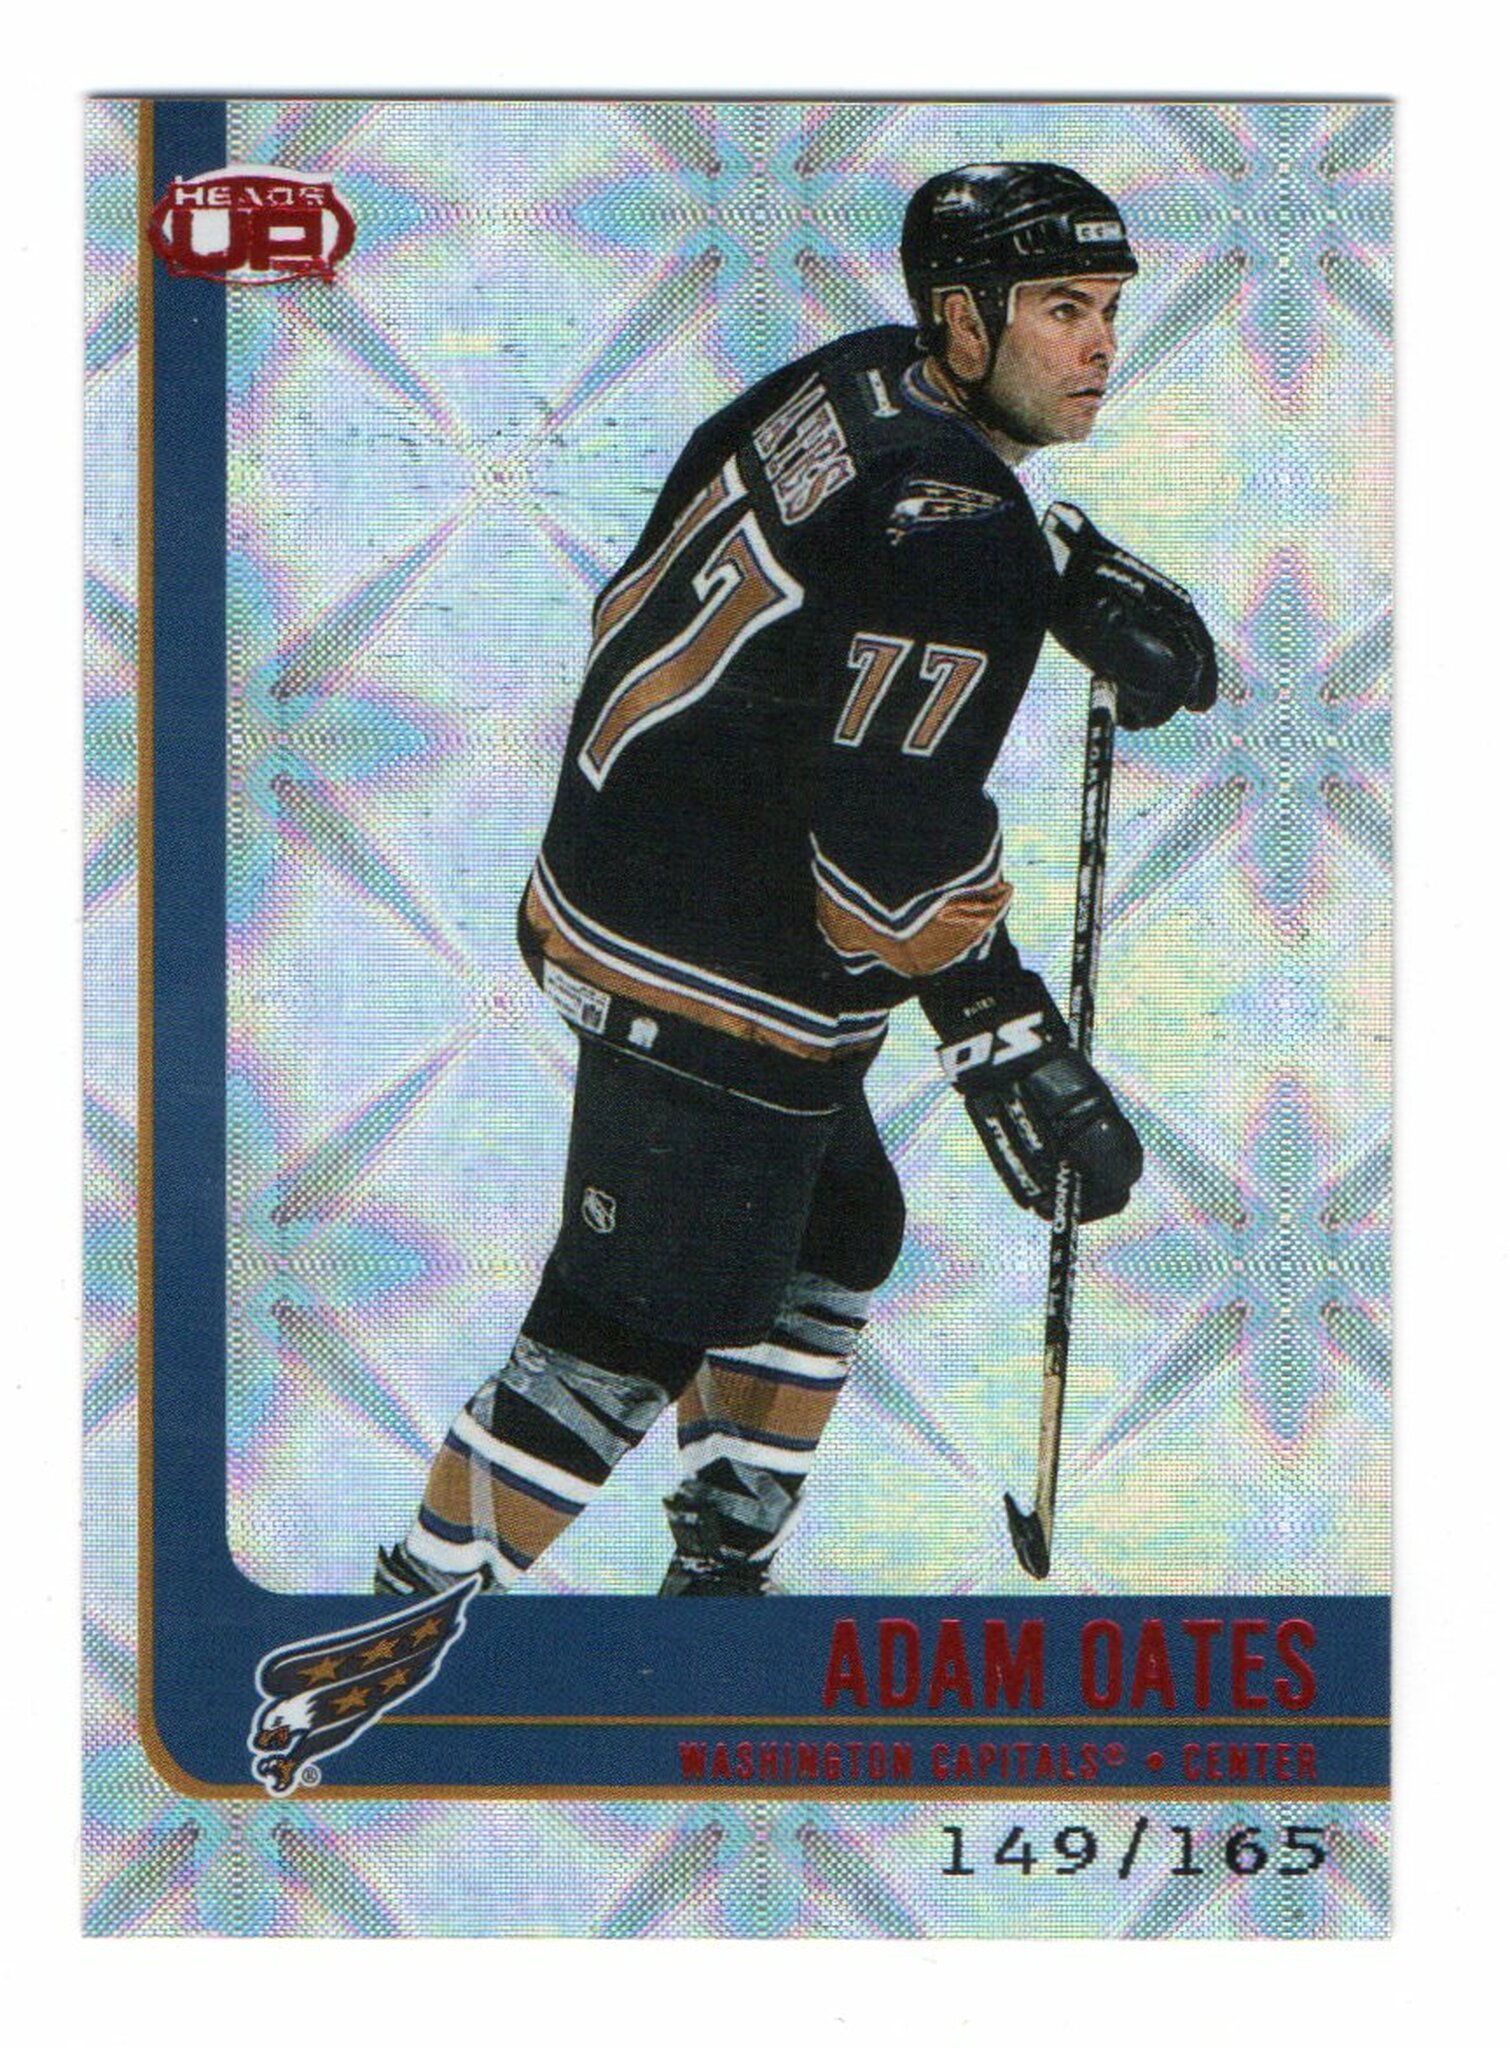 2001-02 Pacific Heads Up Red #100 Adam Oates (30-X70-CAPITALS)